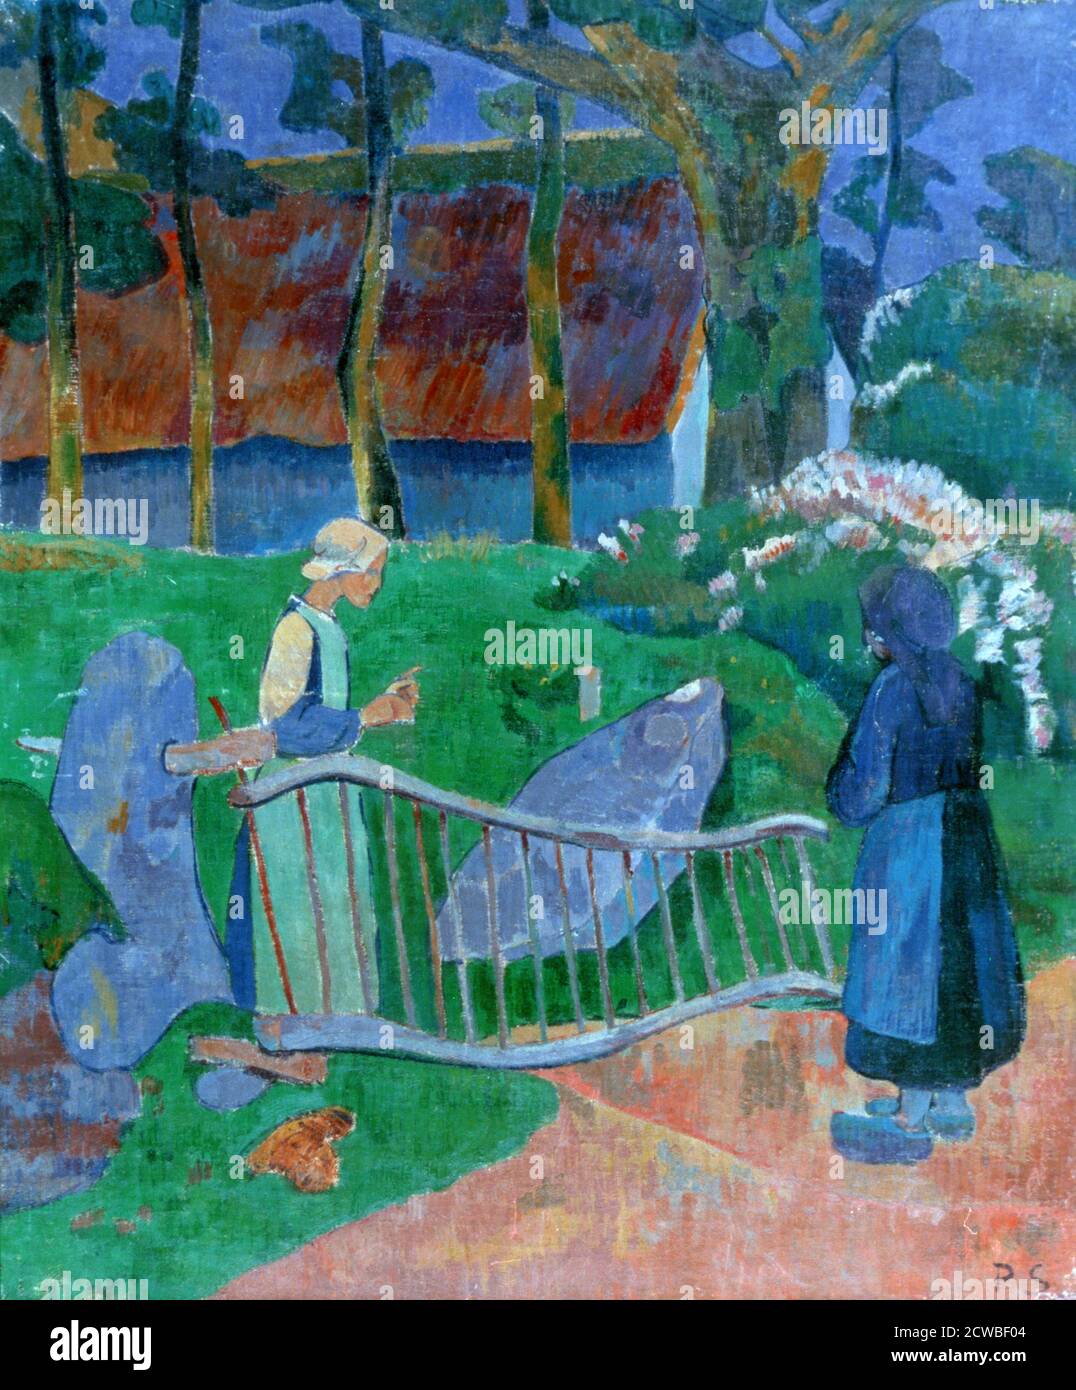 The Flowered Gate', 1889. Artist: Paul Serusier. Paul Serusier(1864-1927) was a French painter who was a pioneer of abstract art and an inspiration for the avant-garde Nabis movement. Stock Photo